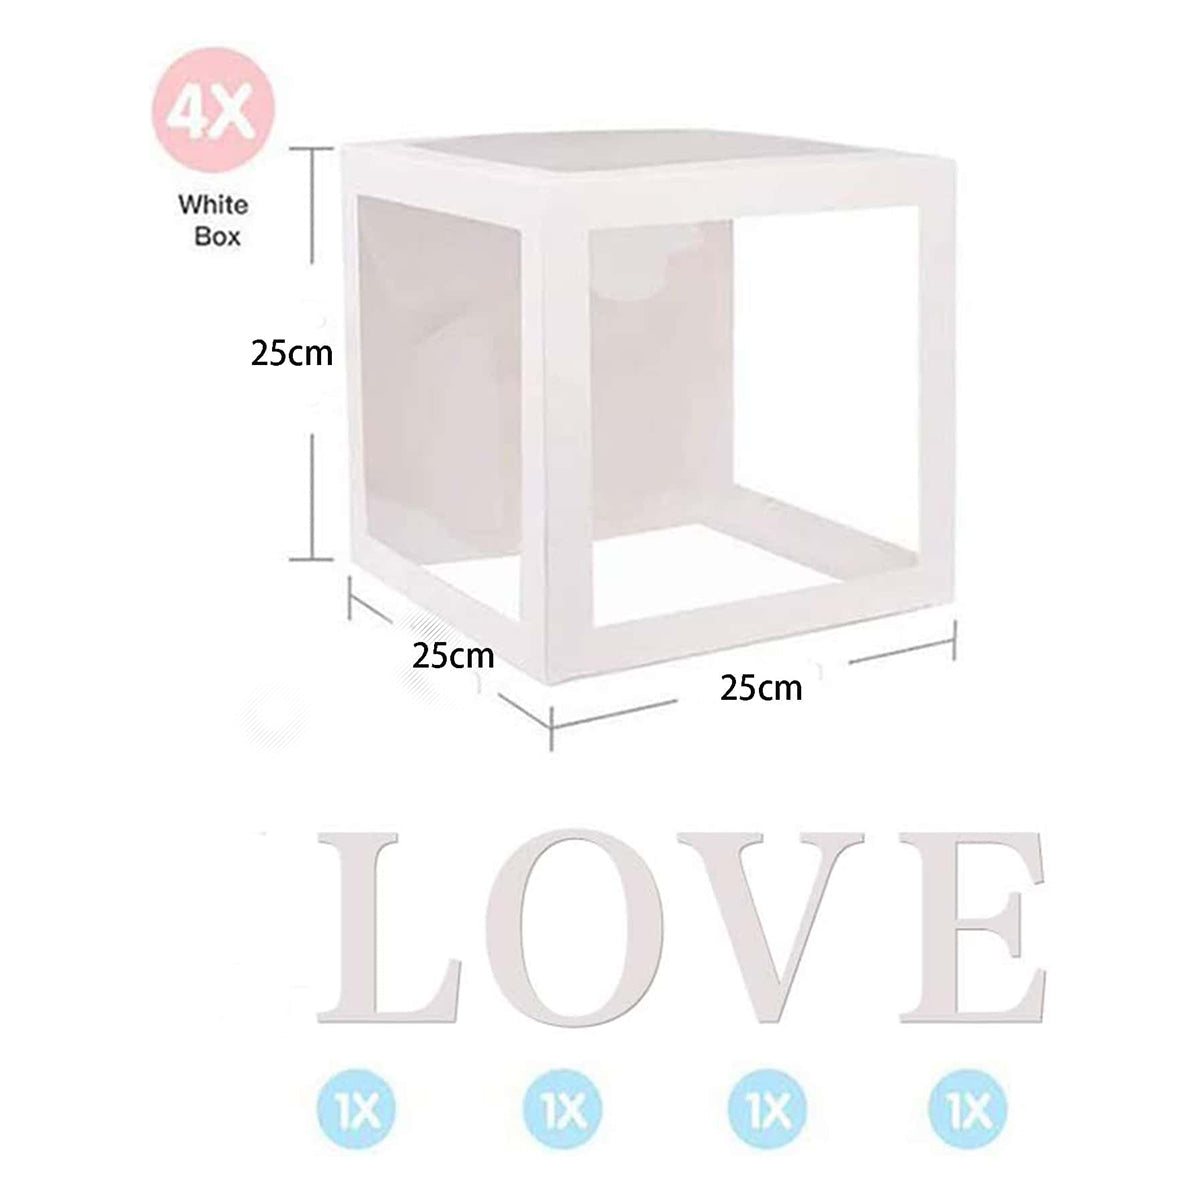 4pcs Valentines Day Decorations Transparent Balloons Boxes with 4 Letters LOVE for Valentine's Day Anniversary Wedding Engagement Party Supplies Decorations